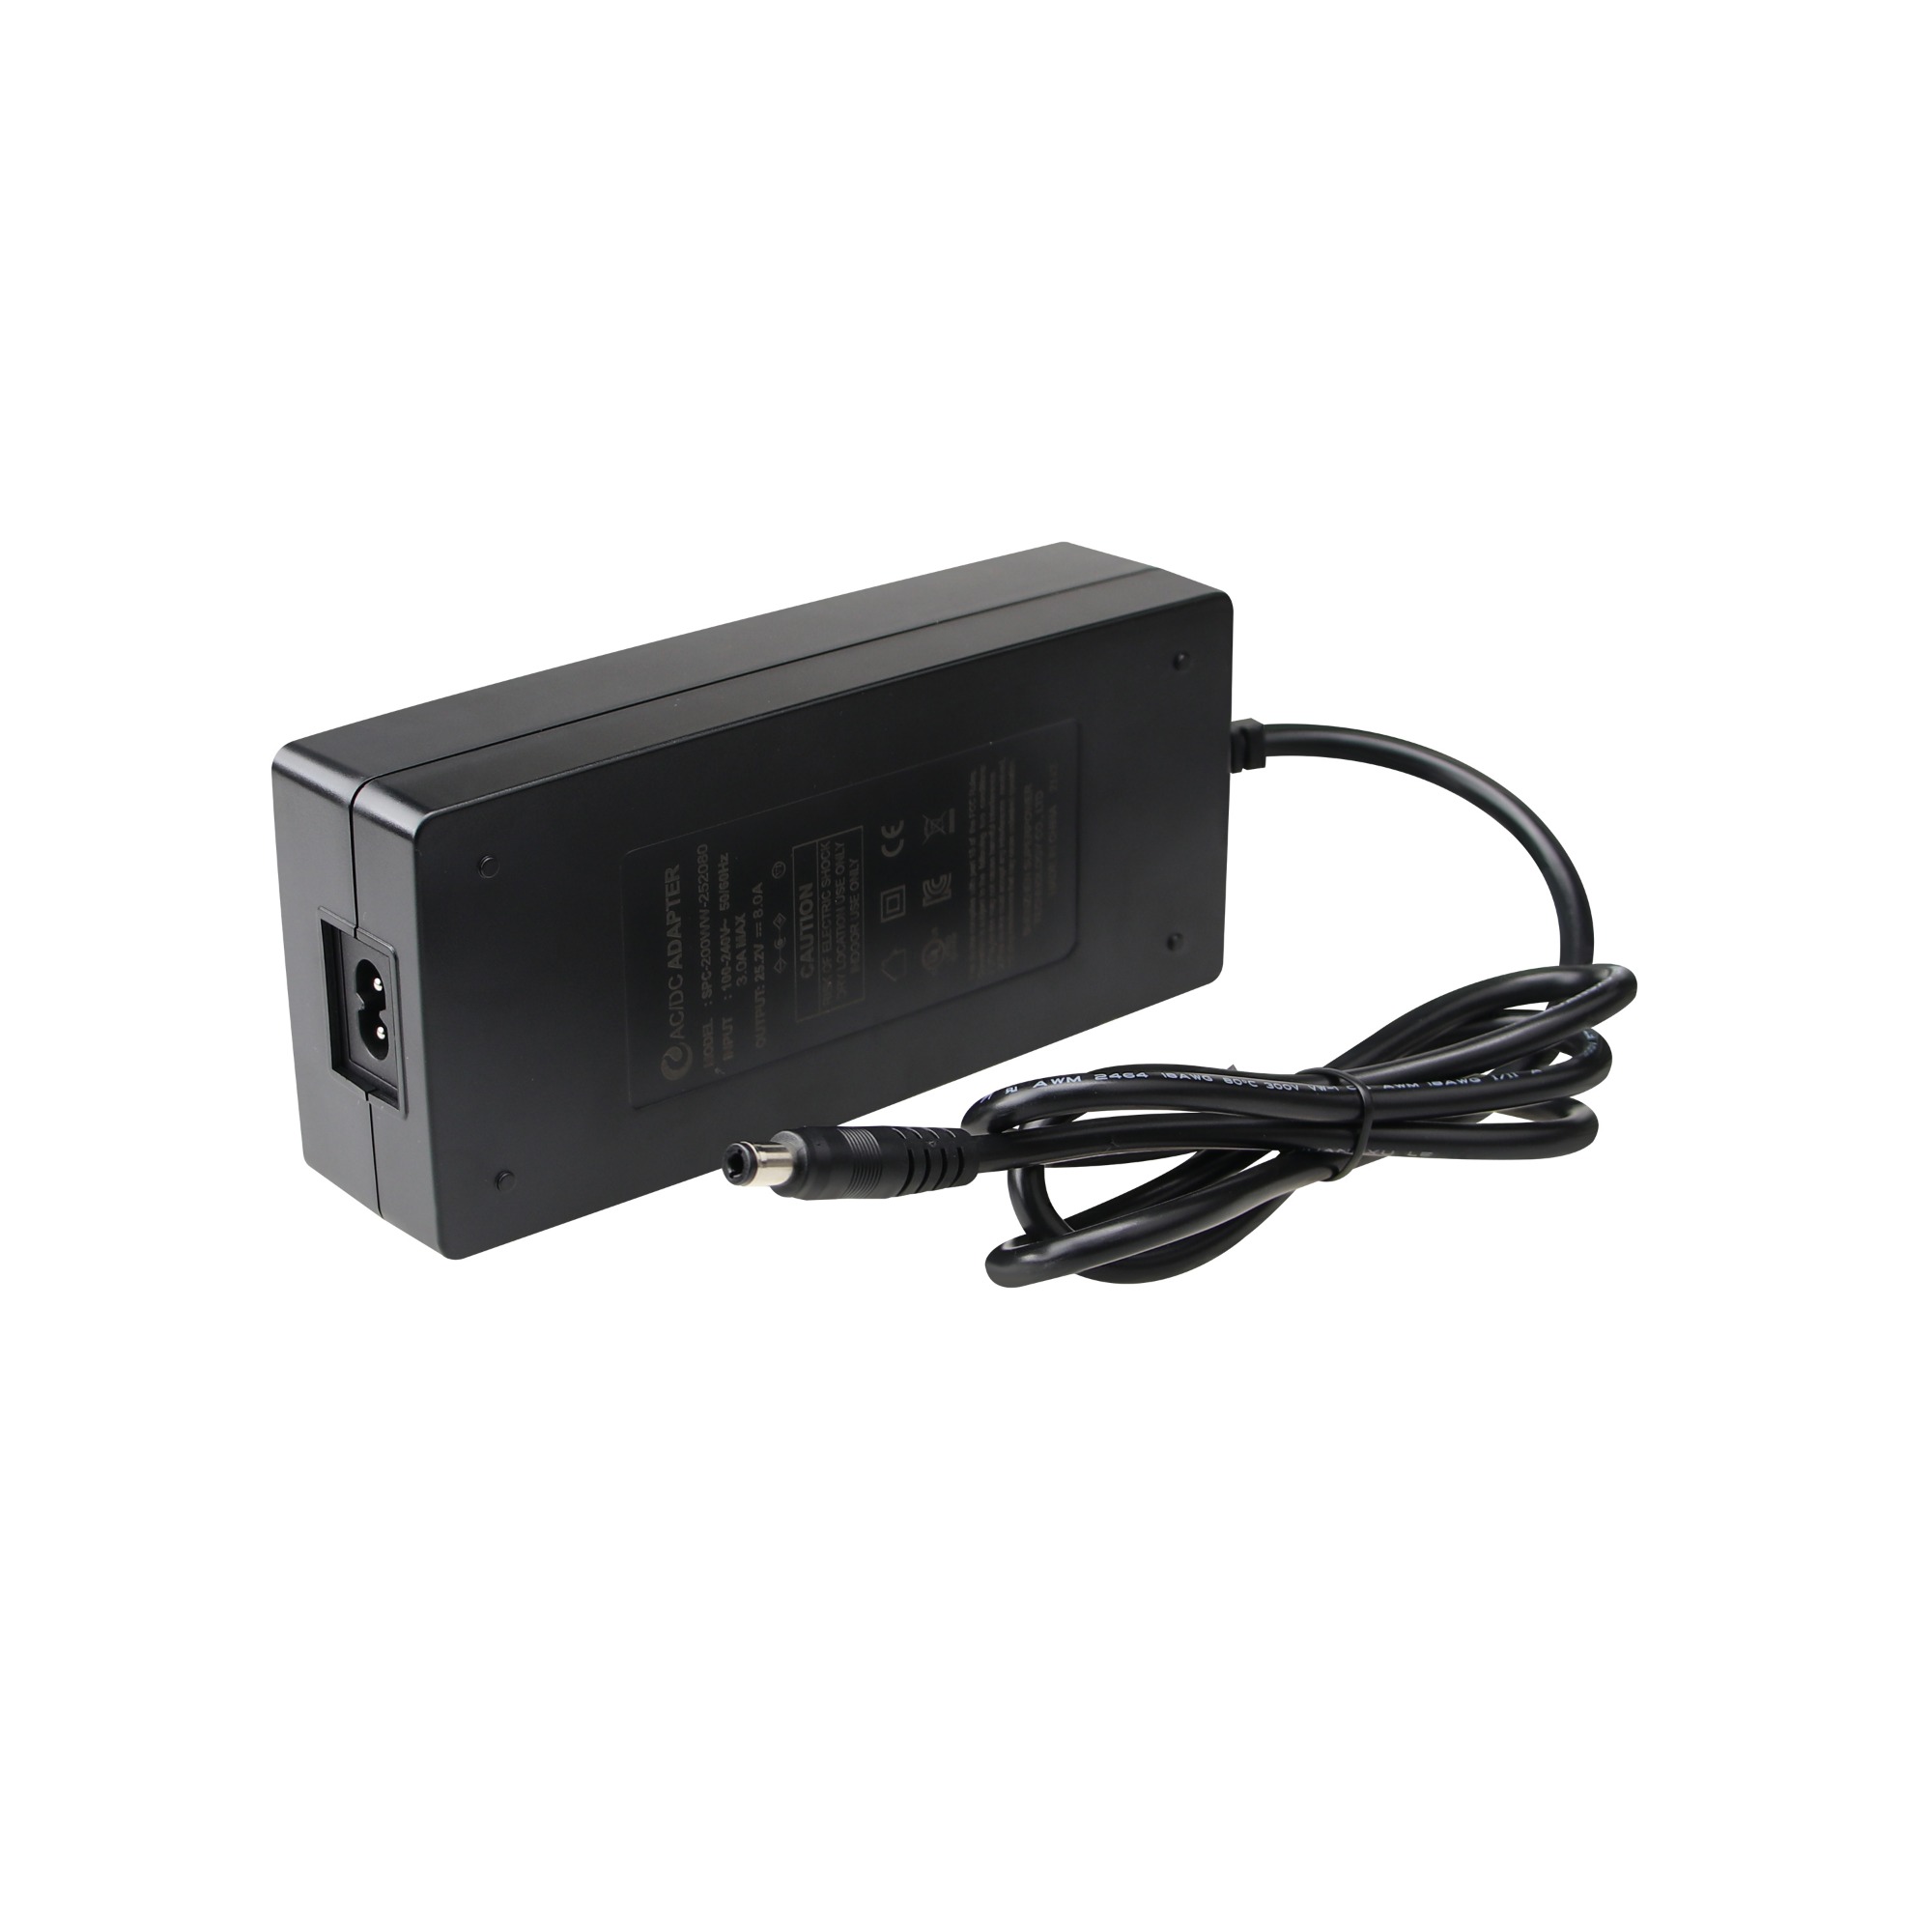 Smart charger 43.8V 4A LiFePO4 battery charger For 36V 12S LiFePO4 Battery charger Electric Scooter E-bike motorcycle